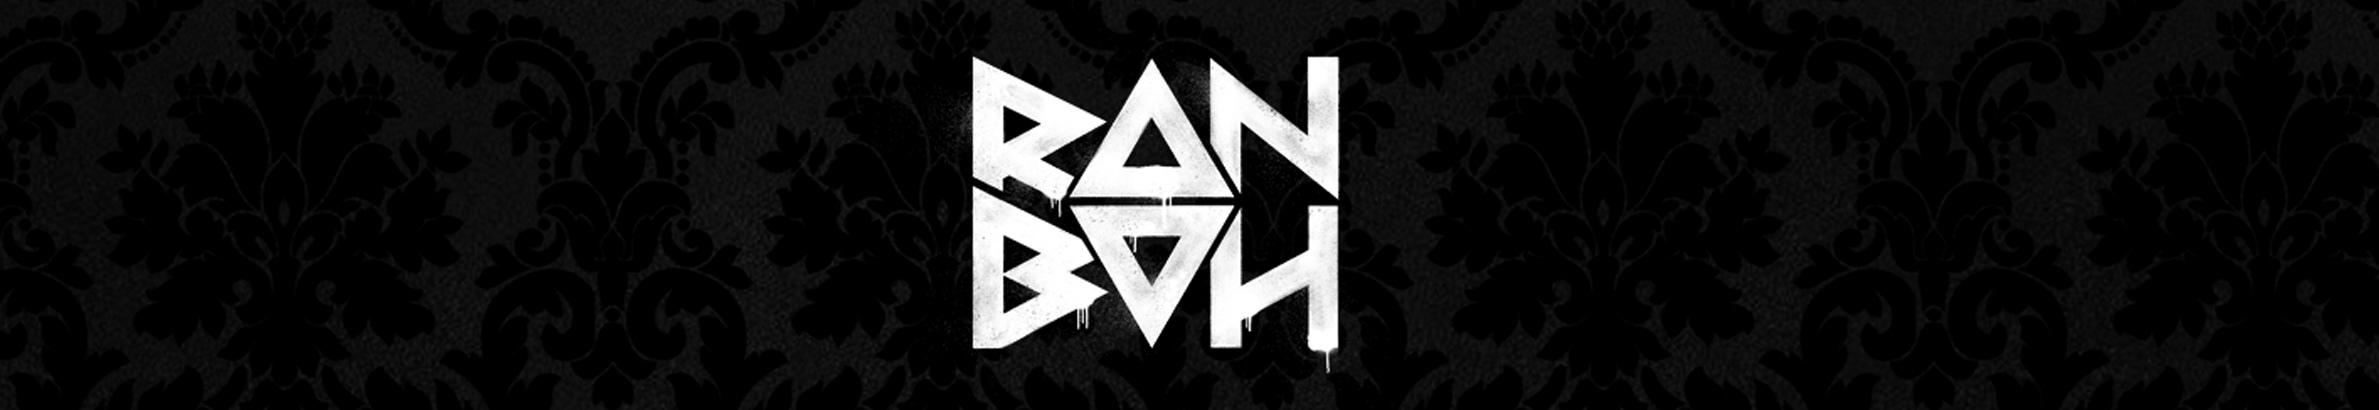 Ranboh .'s profile banner